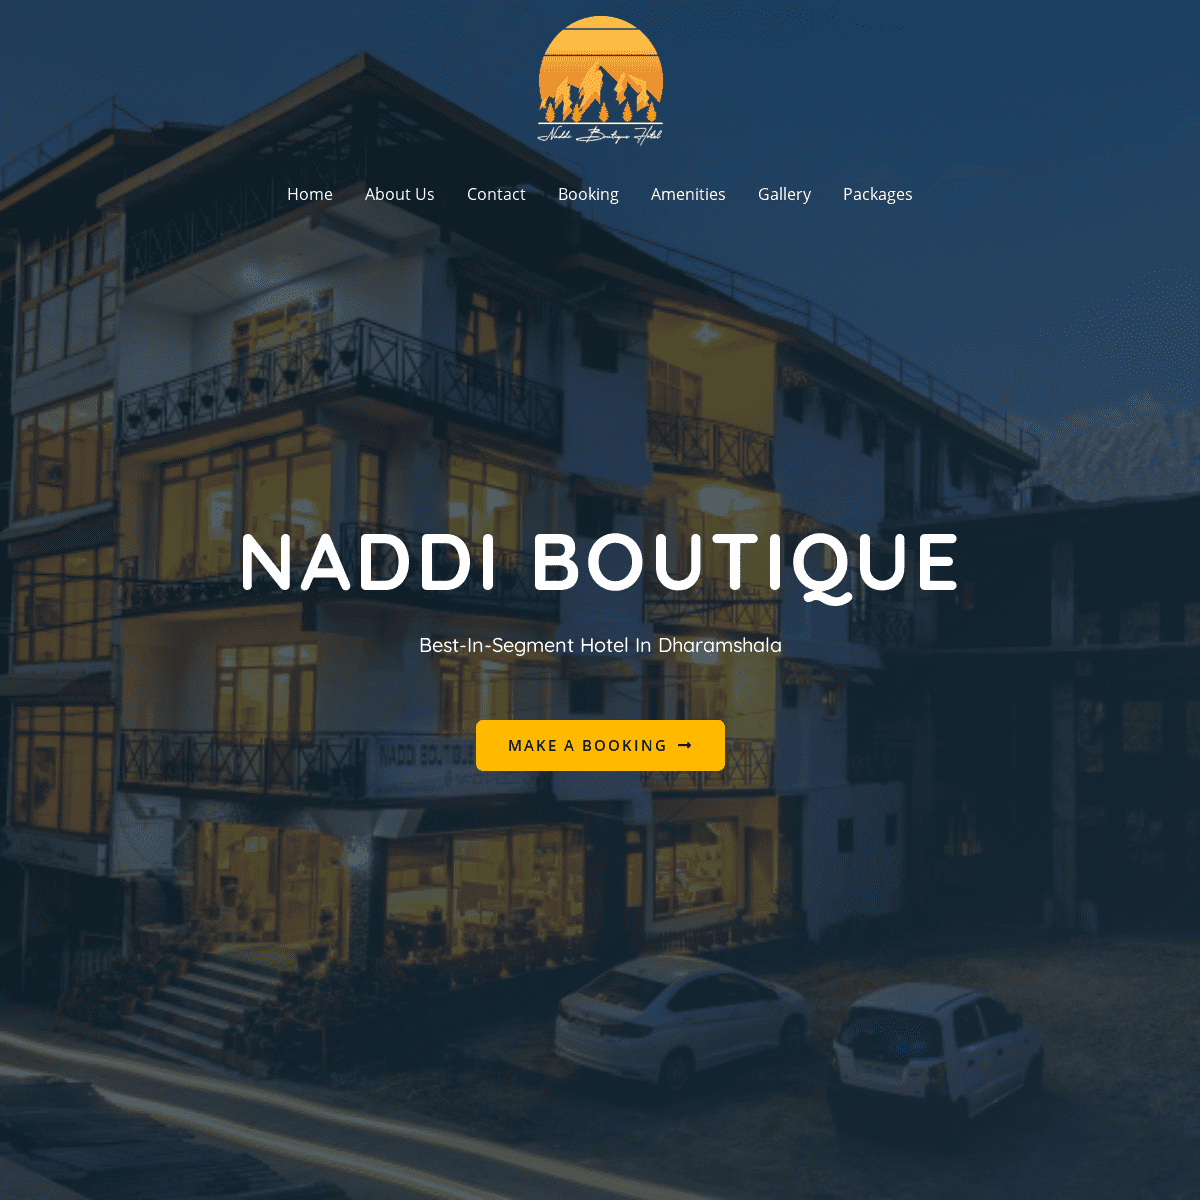 A complete backup of https://naddiboutique.com